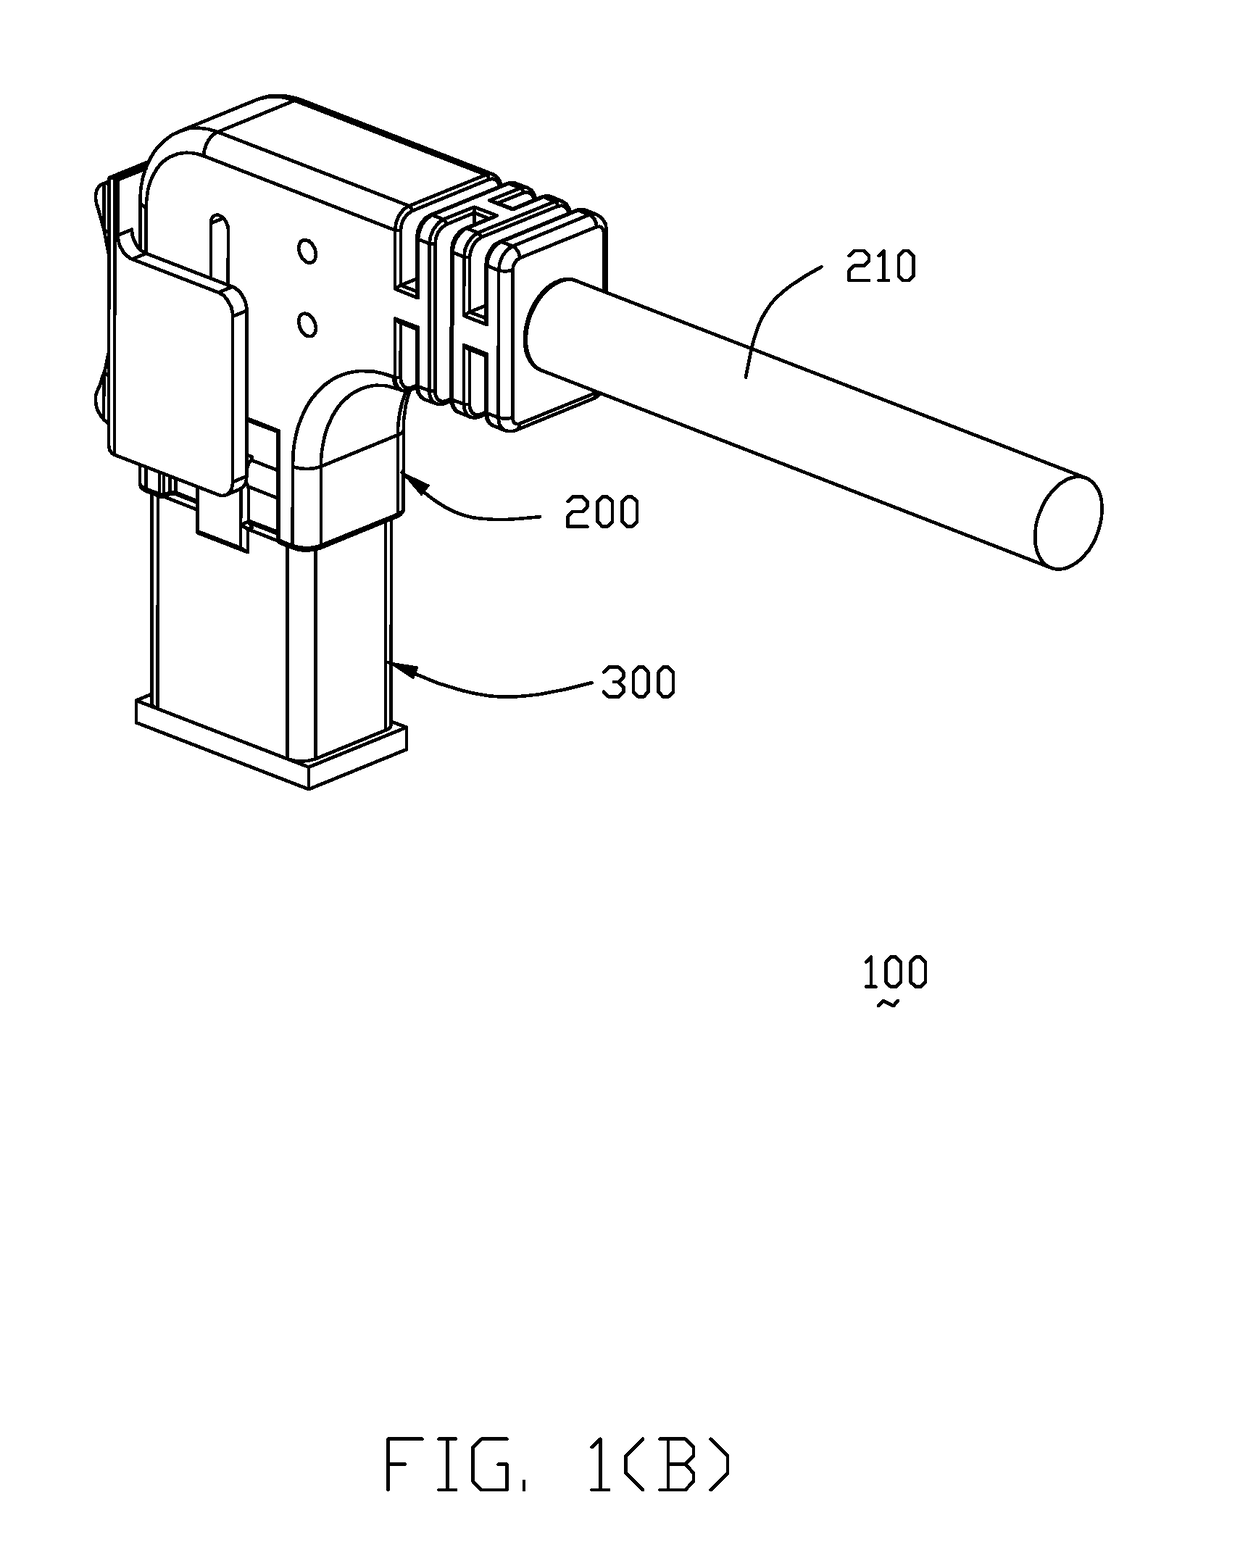 Electrical connector assembly with locking structures thereof